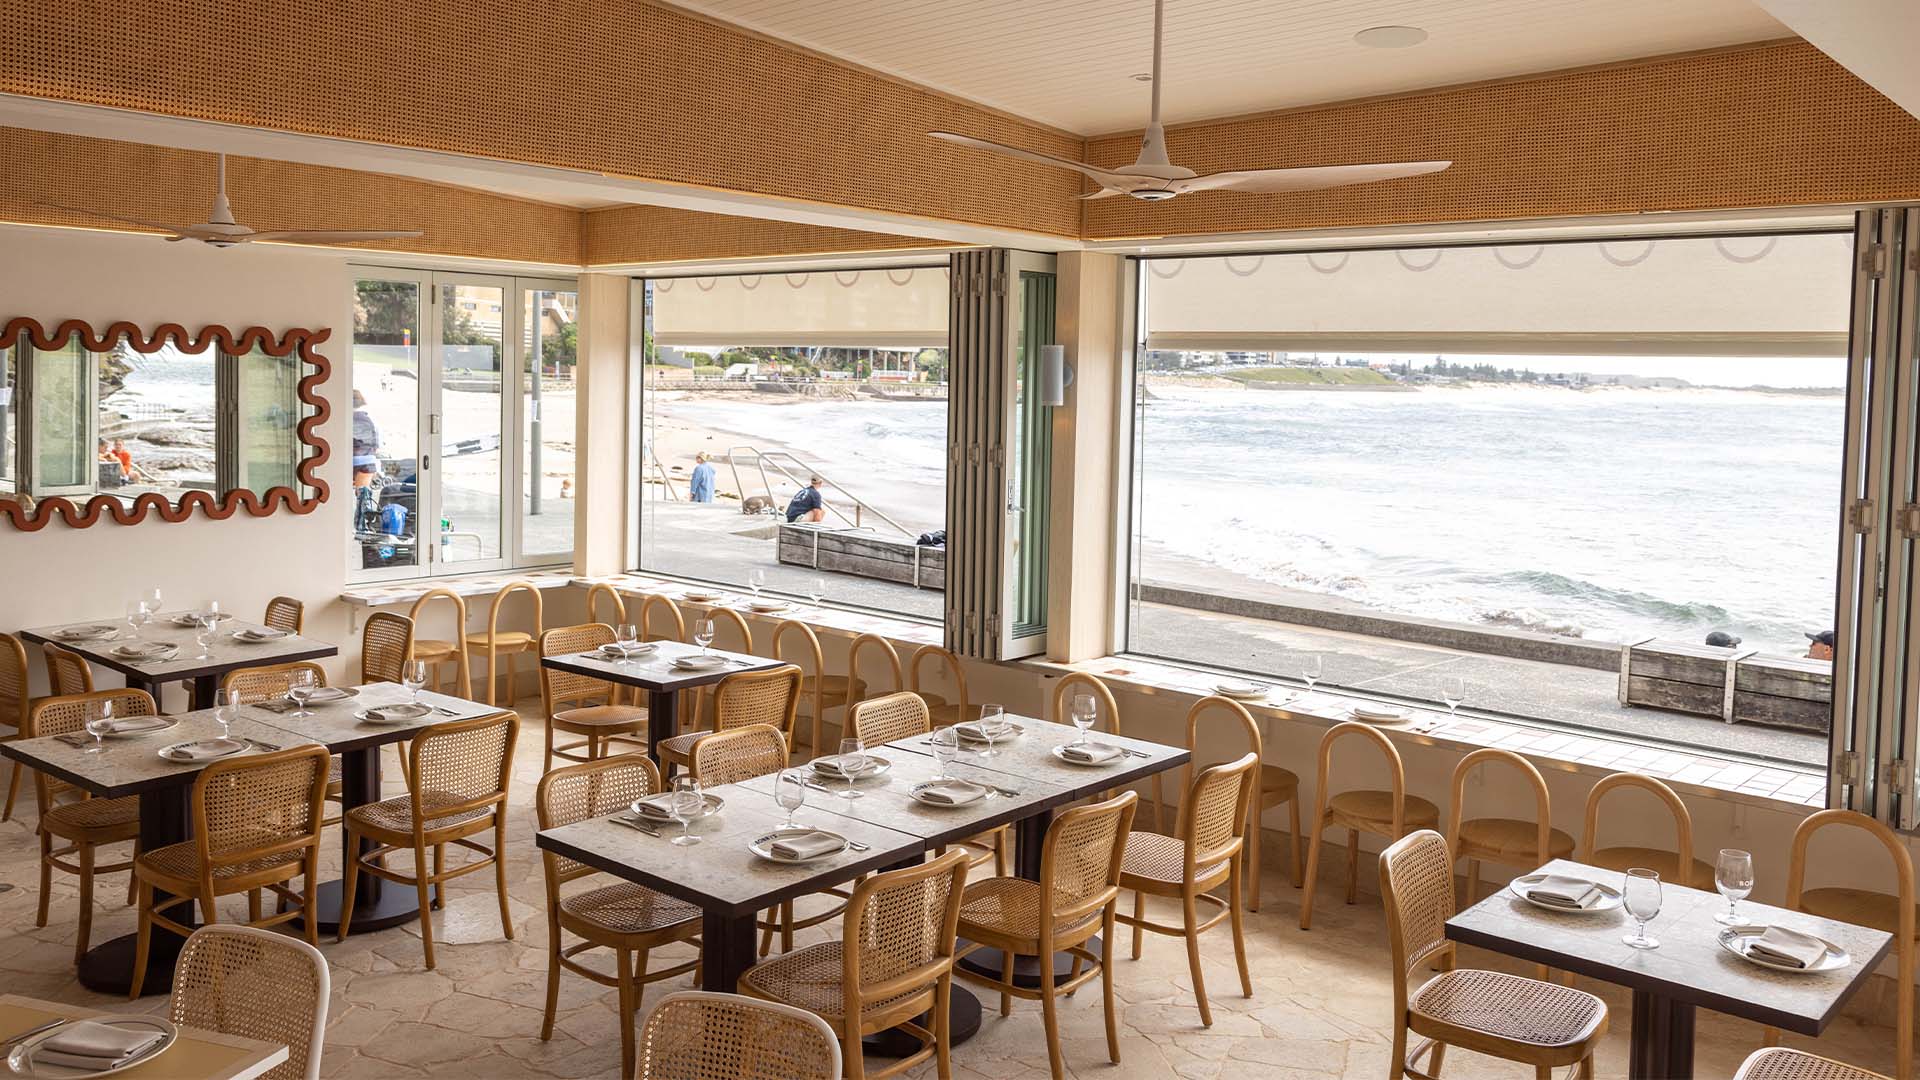 Cronulla's New Mediterranean-Inspired Diner Bobby's Celebrates Seafood Metres From the Ocean